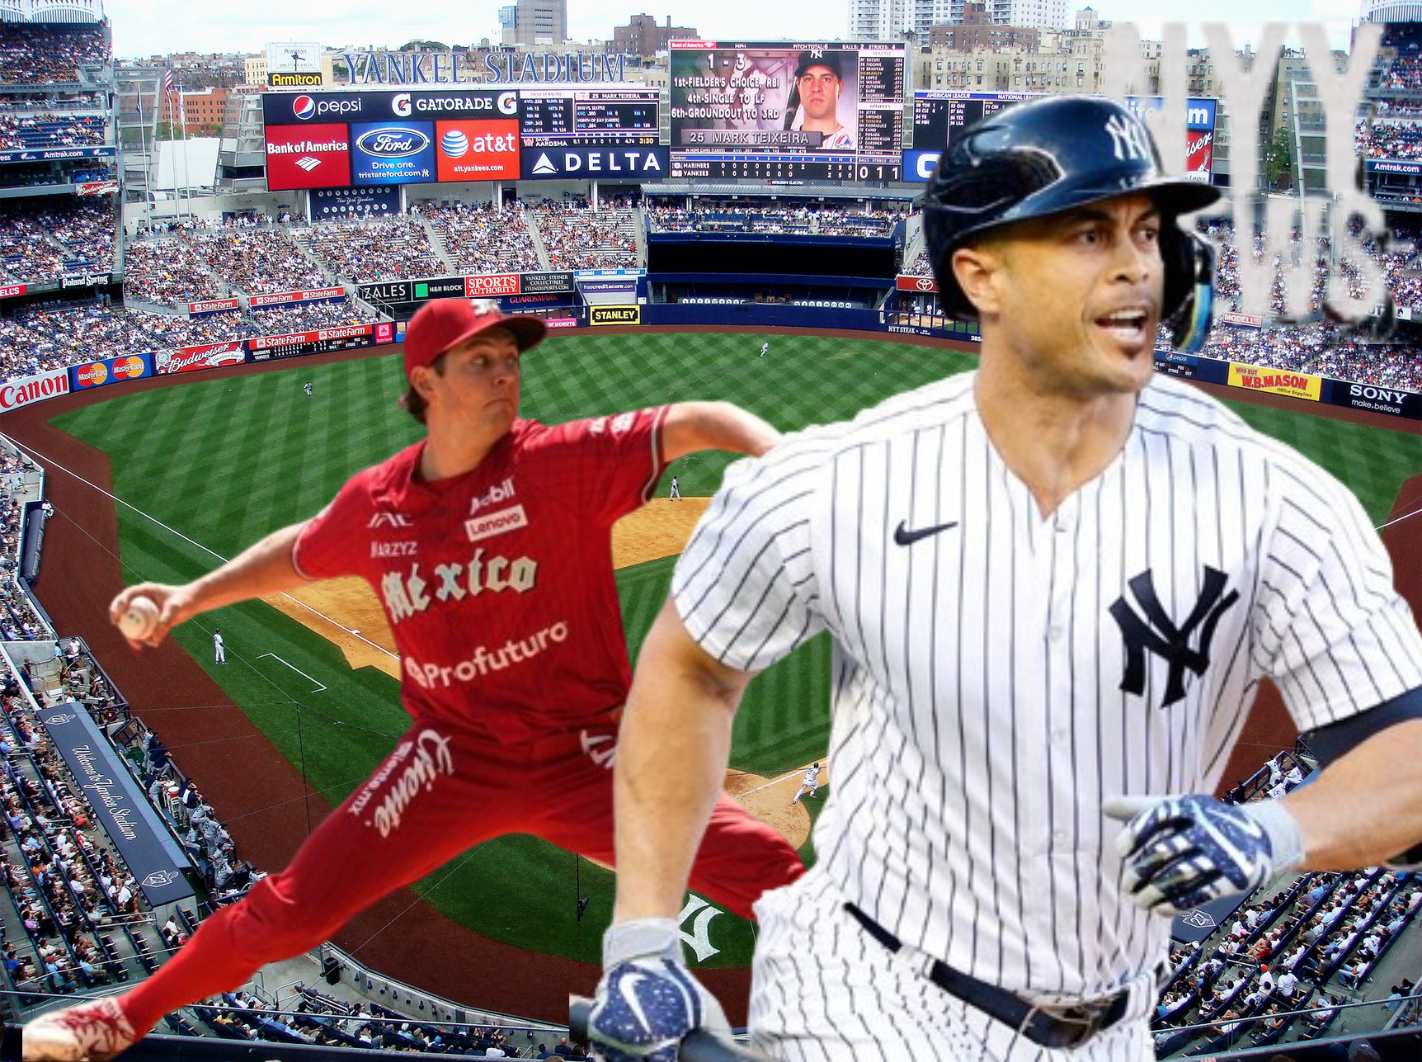 The Yankees are swept in Mexico by the Diablos Rojos